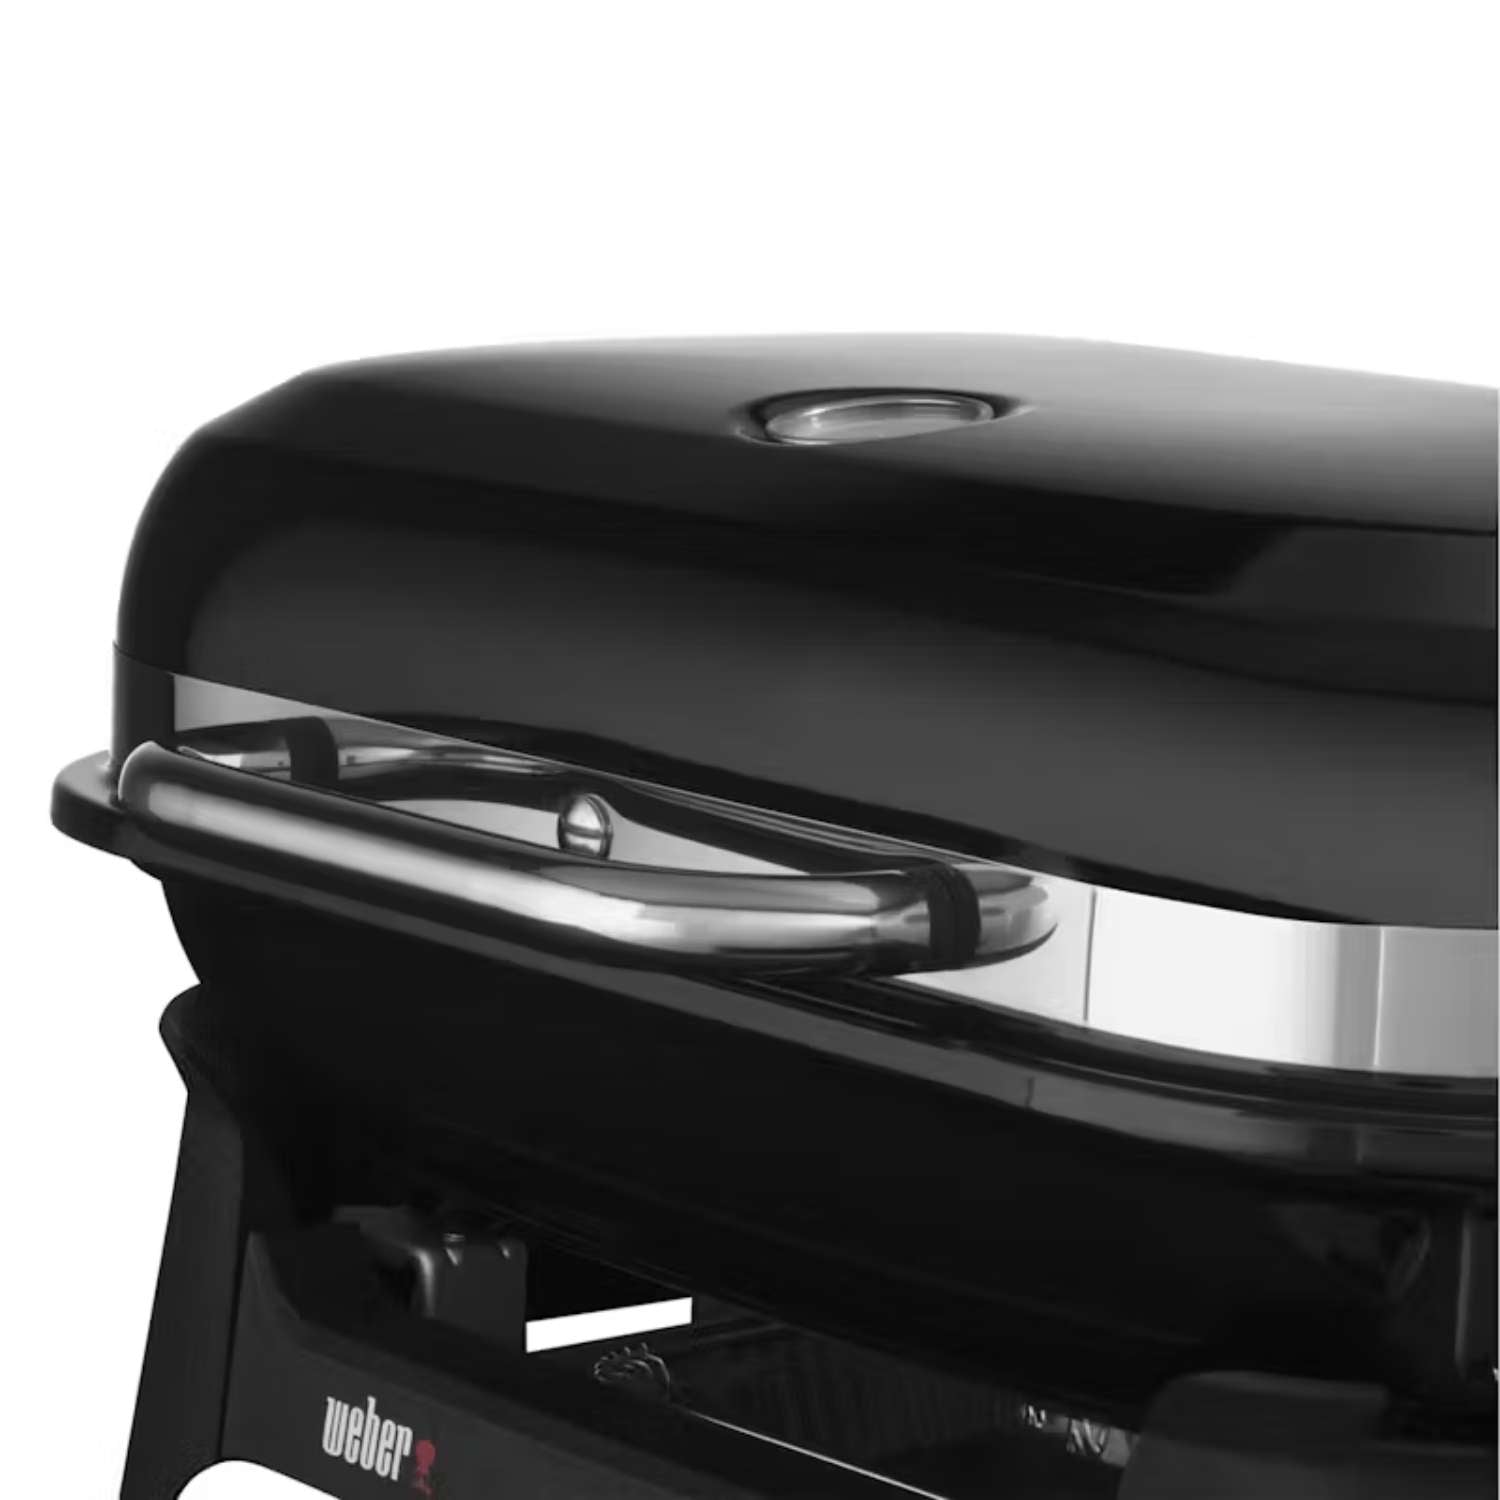 Weber Lumin Compact Grill perfect for outdoor barbecues available at MeatKing.hk11